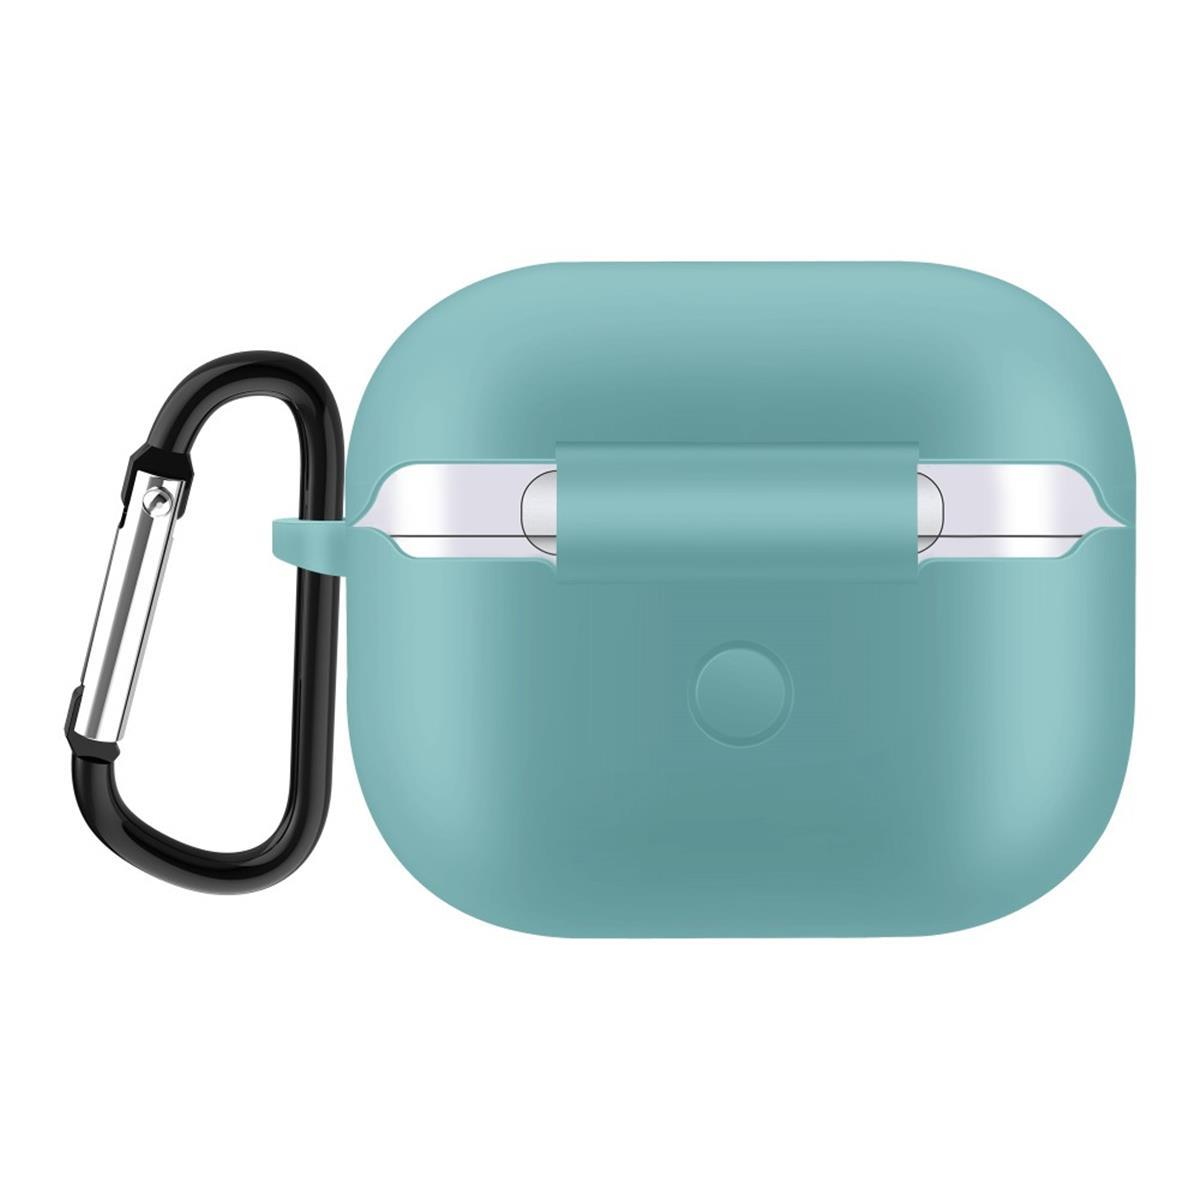 Silikoncover AirPods Apple 3 COVERKINGZ Unisex, 76810 Grün, für Ladecase